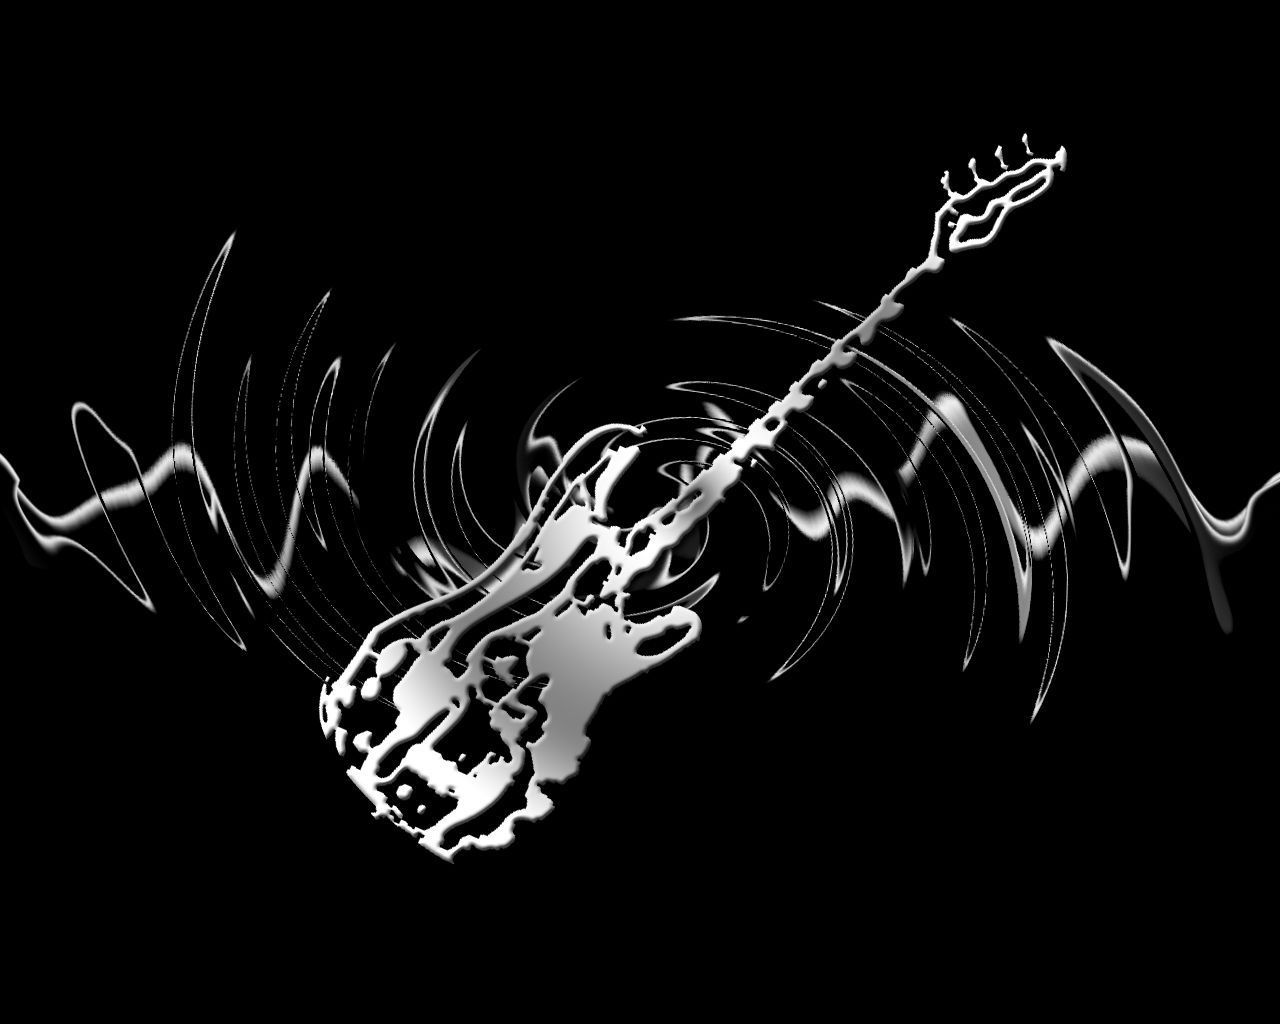 Skeleton Bass Guitar by isaacrtree on DeviantArt